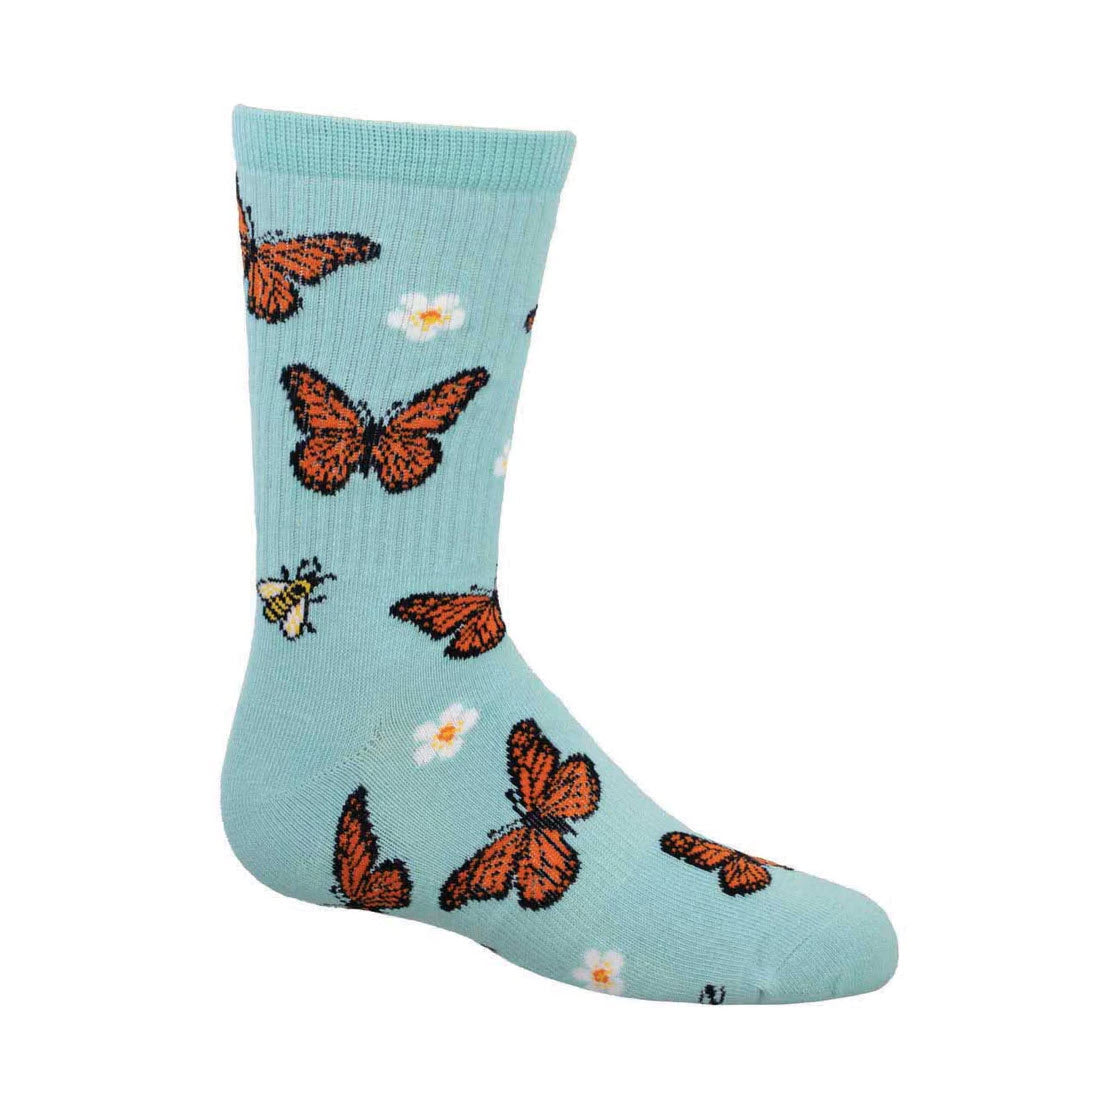 A blue SOCKSMITH BE KIND TO MONARCHS CREW SOCKS BLUE - KIDS sock designed with a pattern of orange butterflies and small white flowers, displayed against a white background.